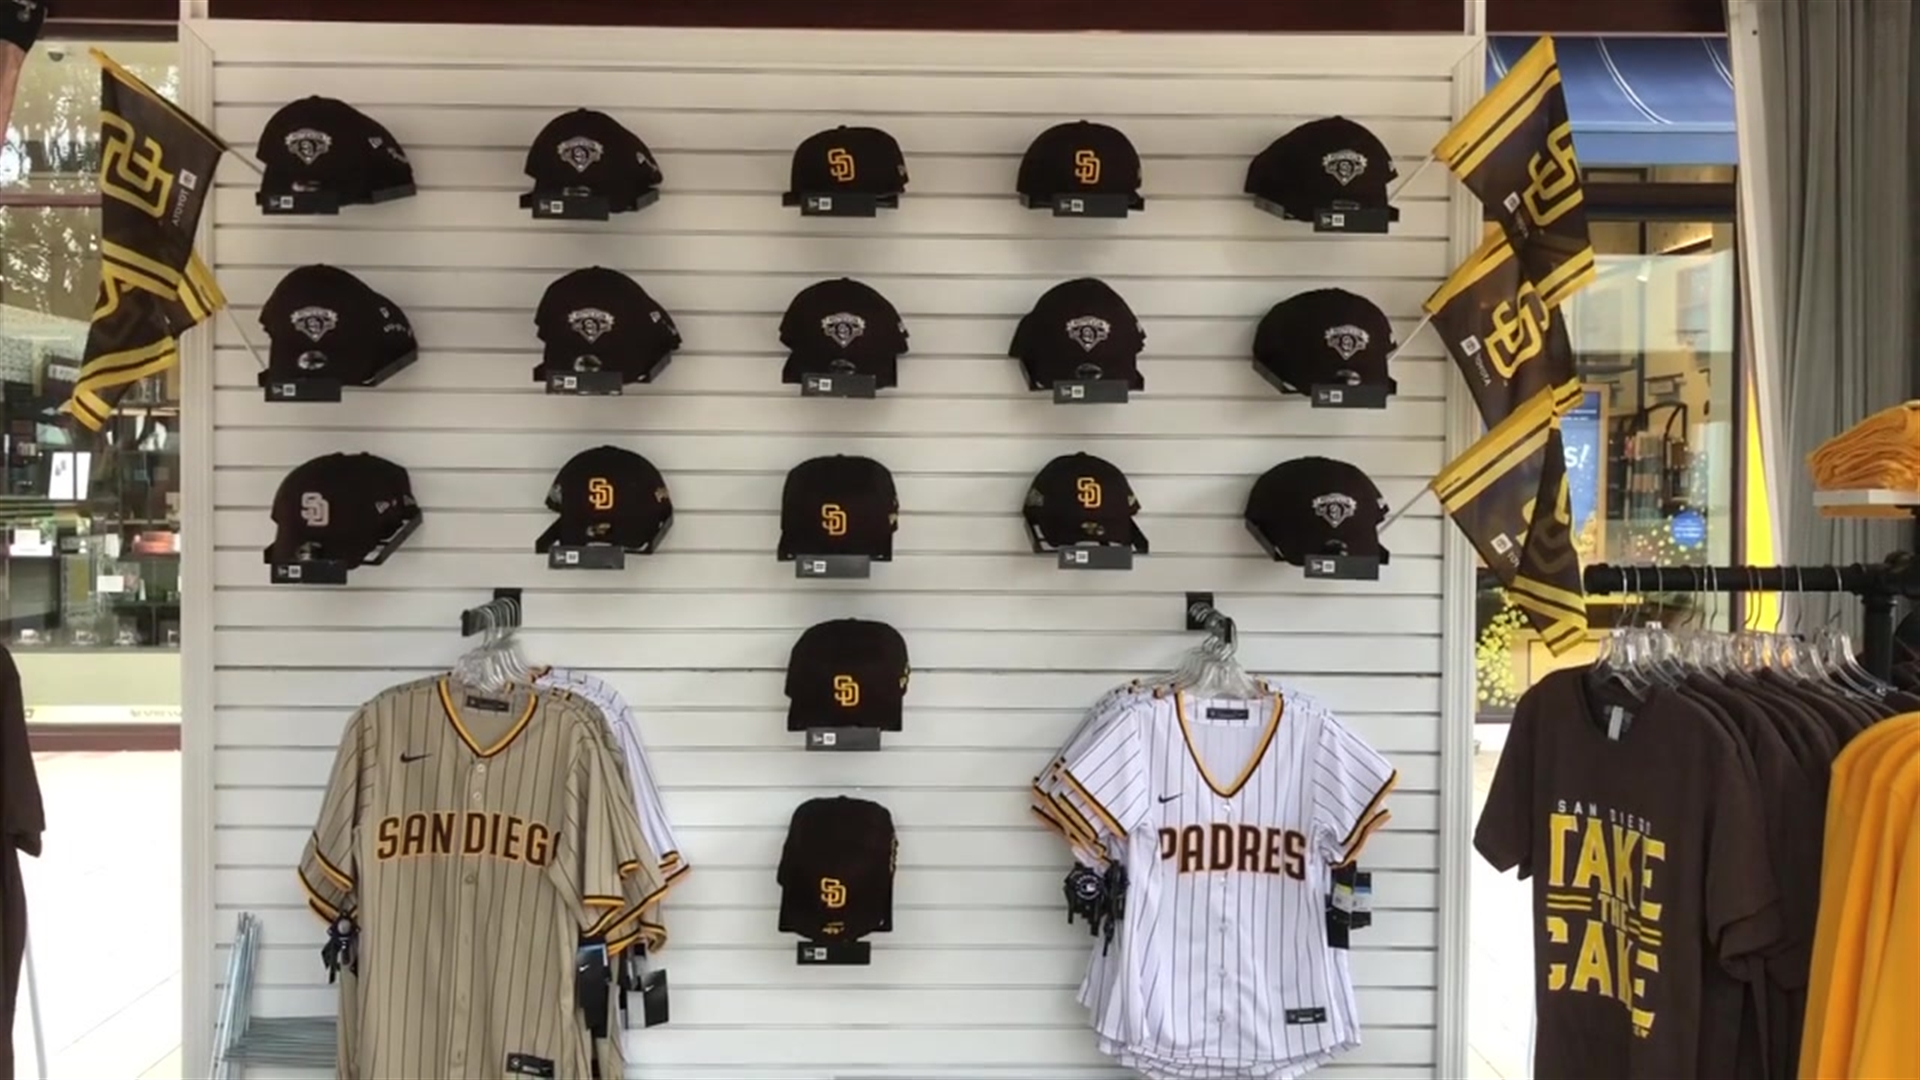 San Diego Padres - We've got lots of Padres gear coming at you